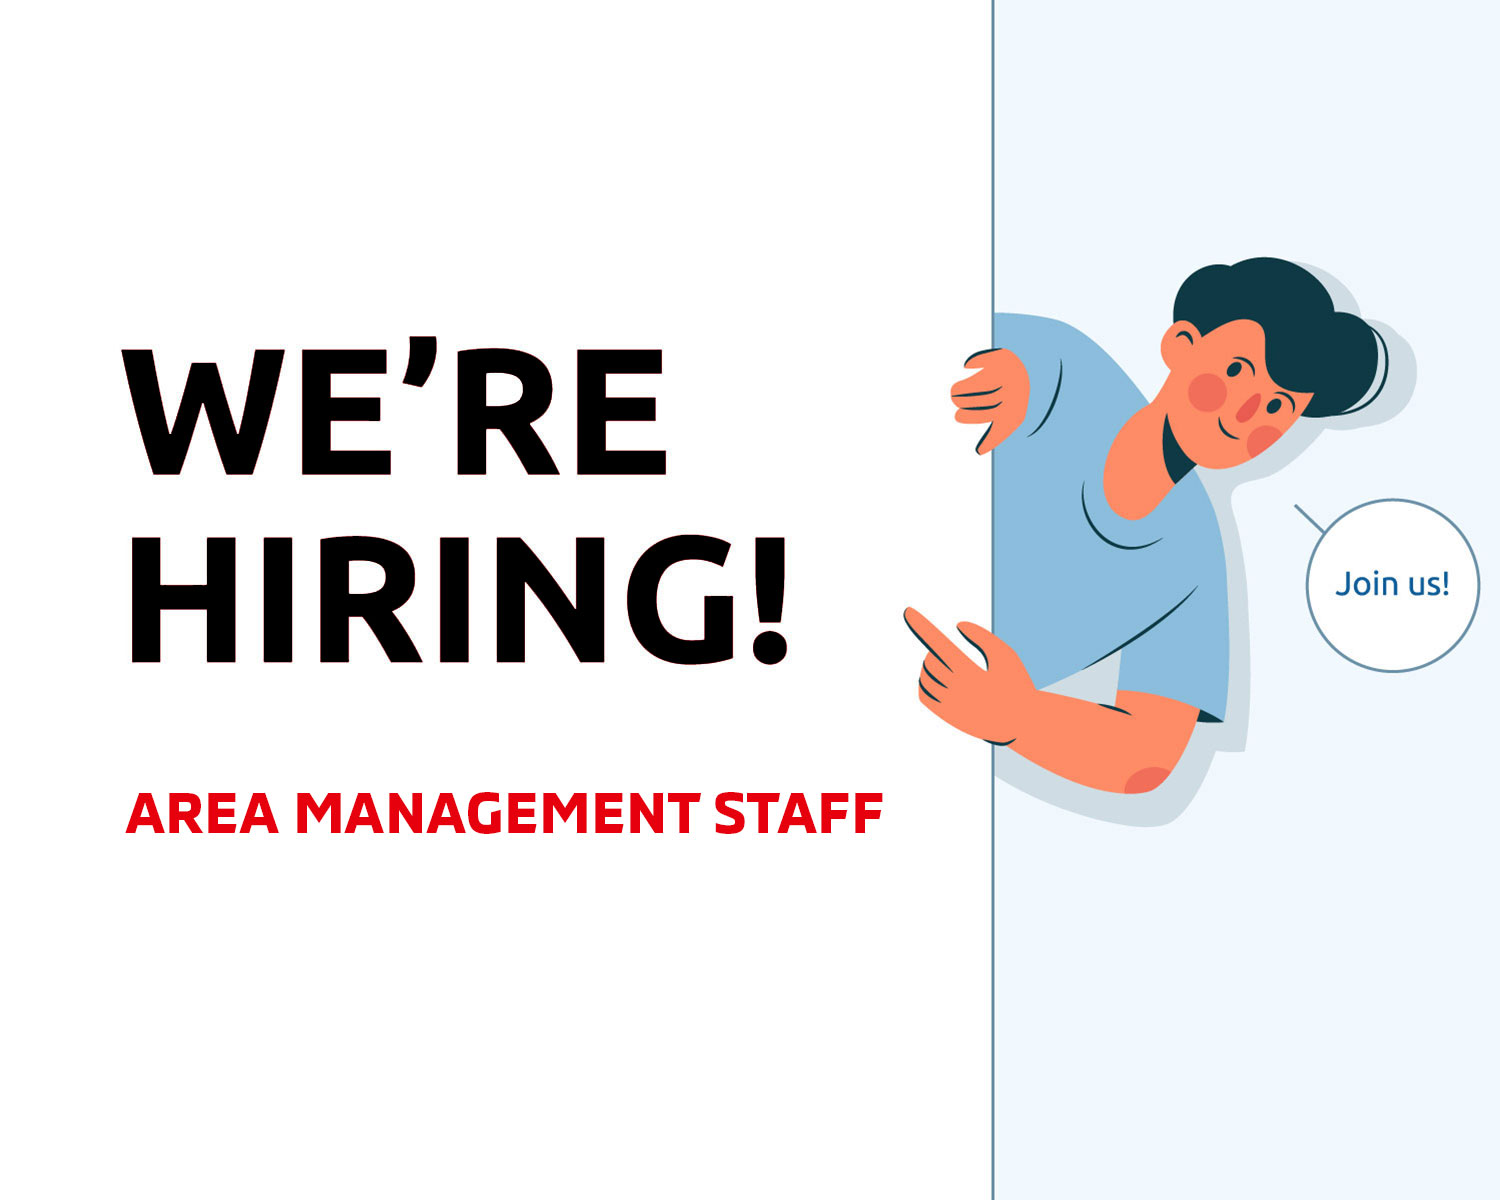 TUYỂN DỤNG: AREA MANAGEMENT STAFF